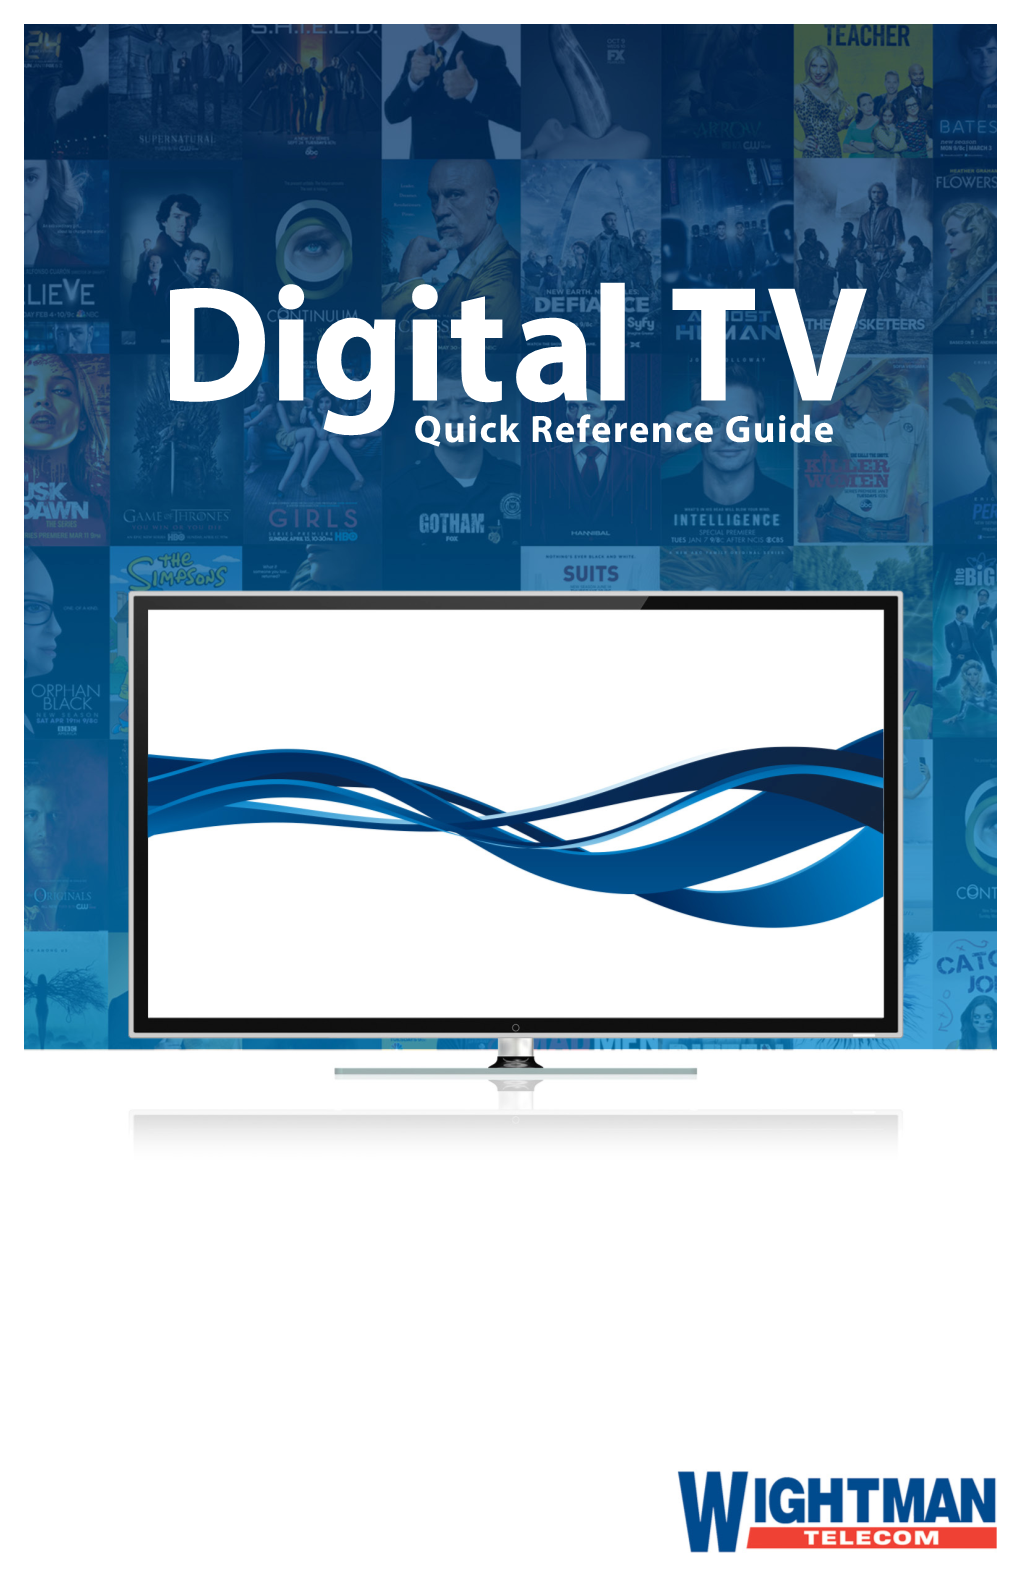 Digital TV Quick Reference Guide CONTENTS